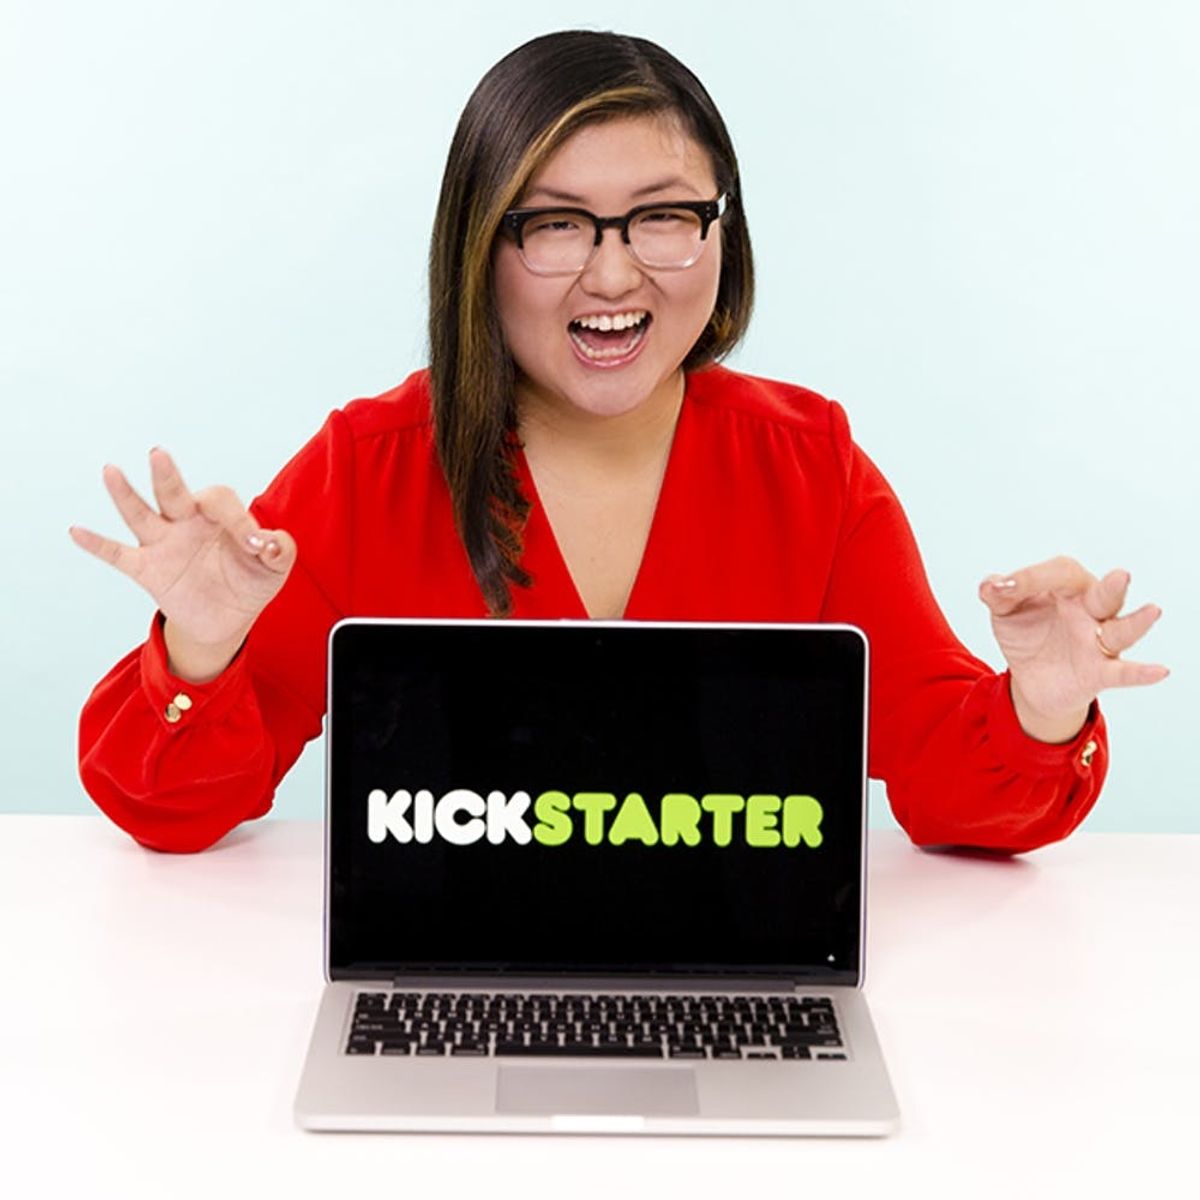 Learn How to Become Your Own Kickstarter Queen in Our New Online Class